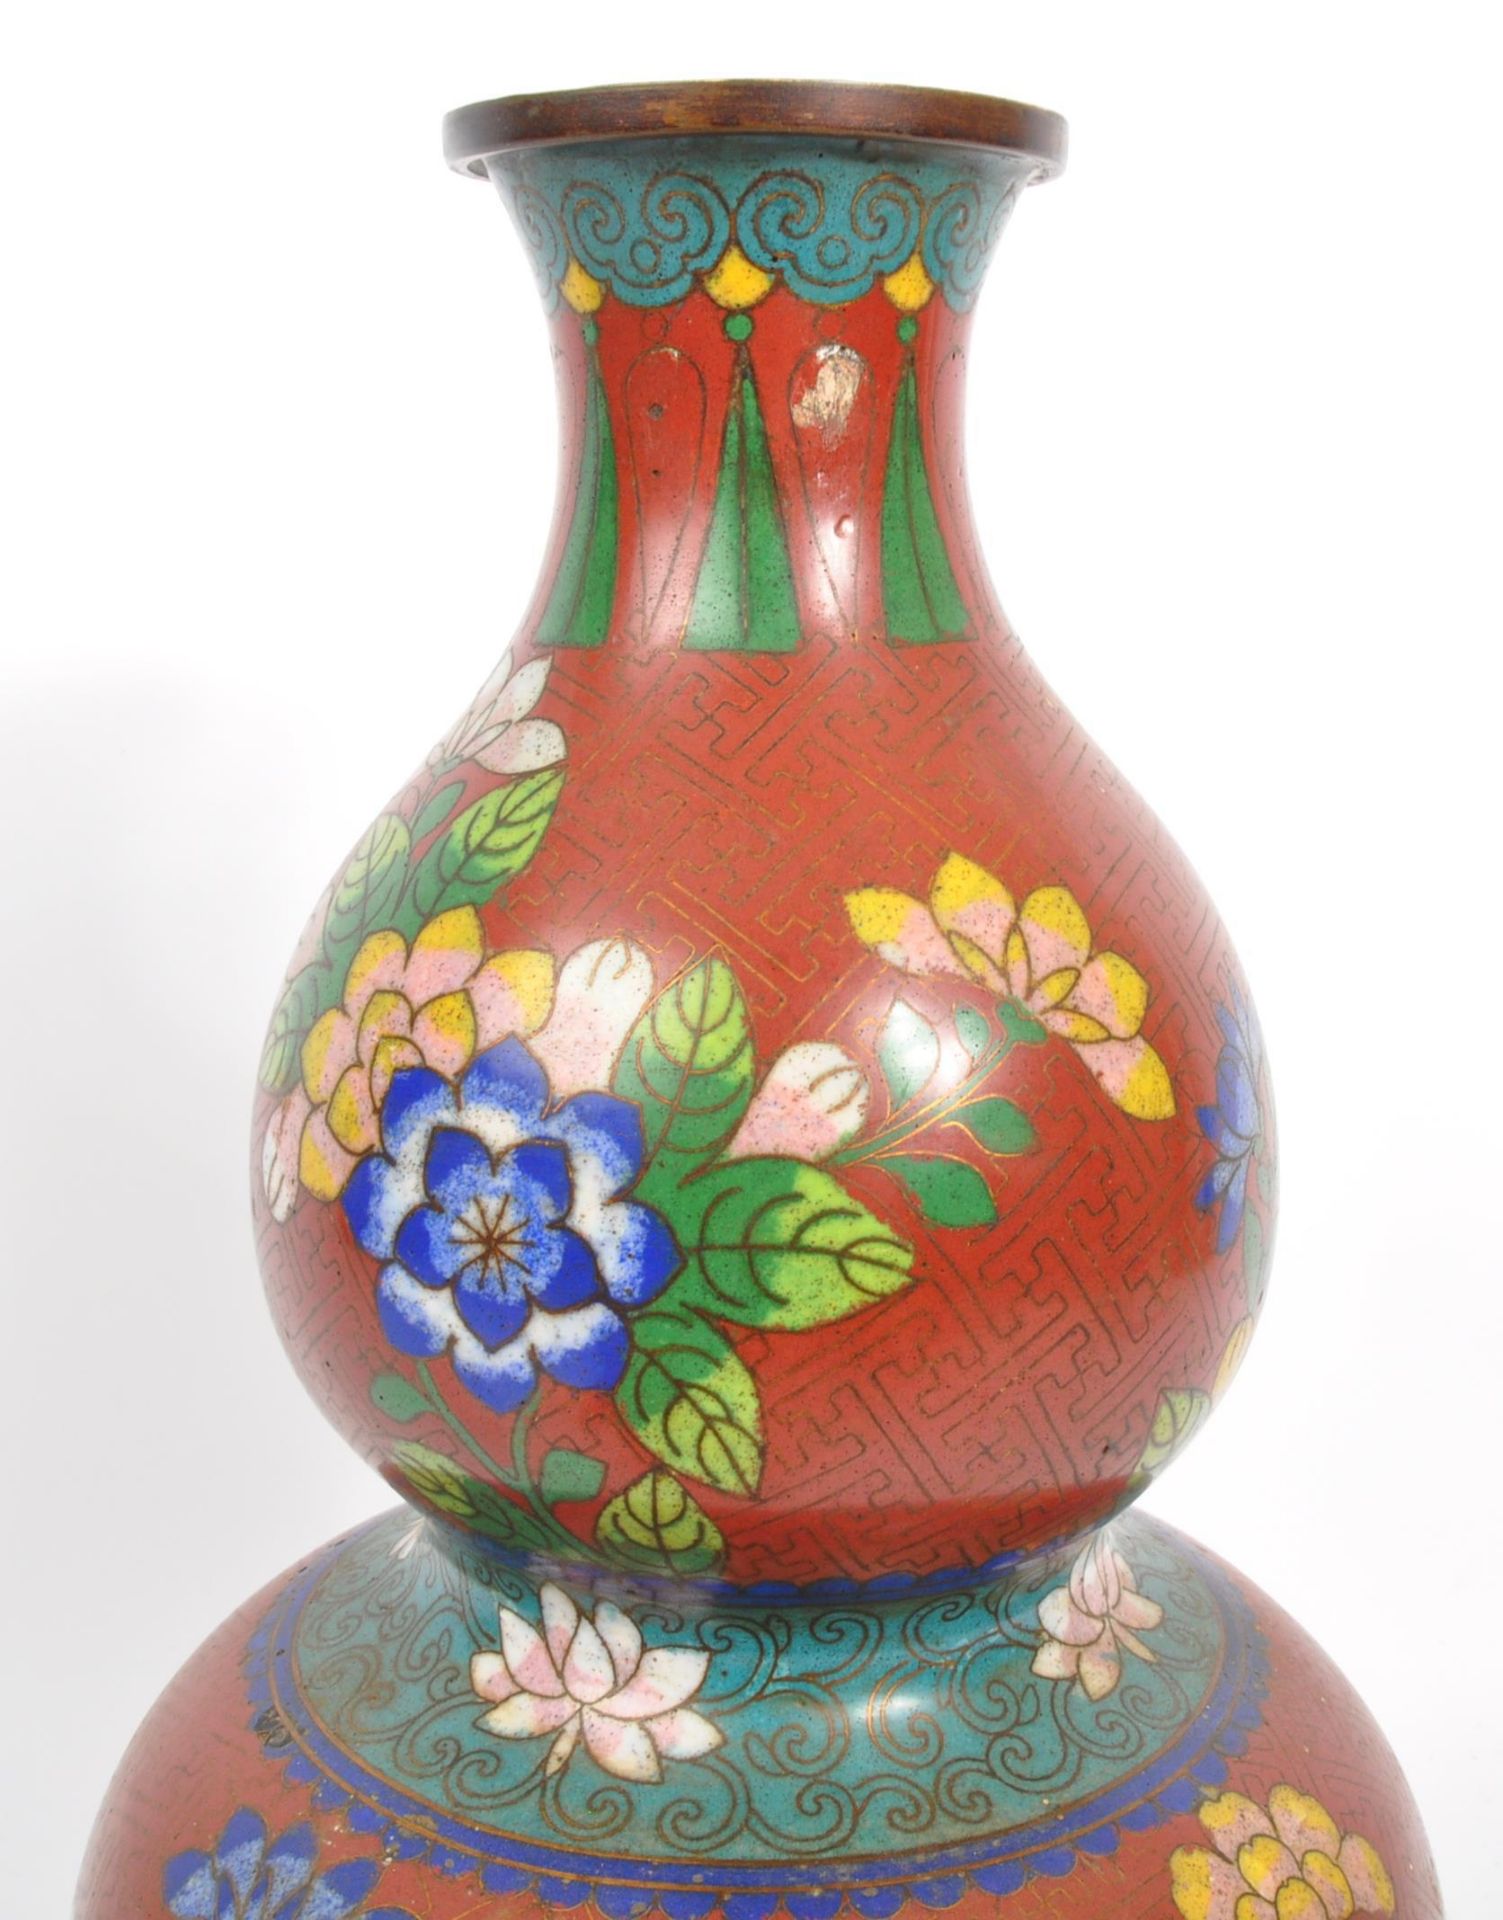 EARLY 20TH CENTURY CHINESE ORIENTAL CLOISONNE DUAL GOURD VASE - Image 5 of 6